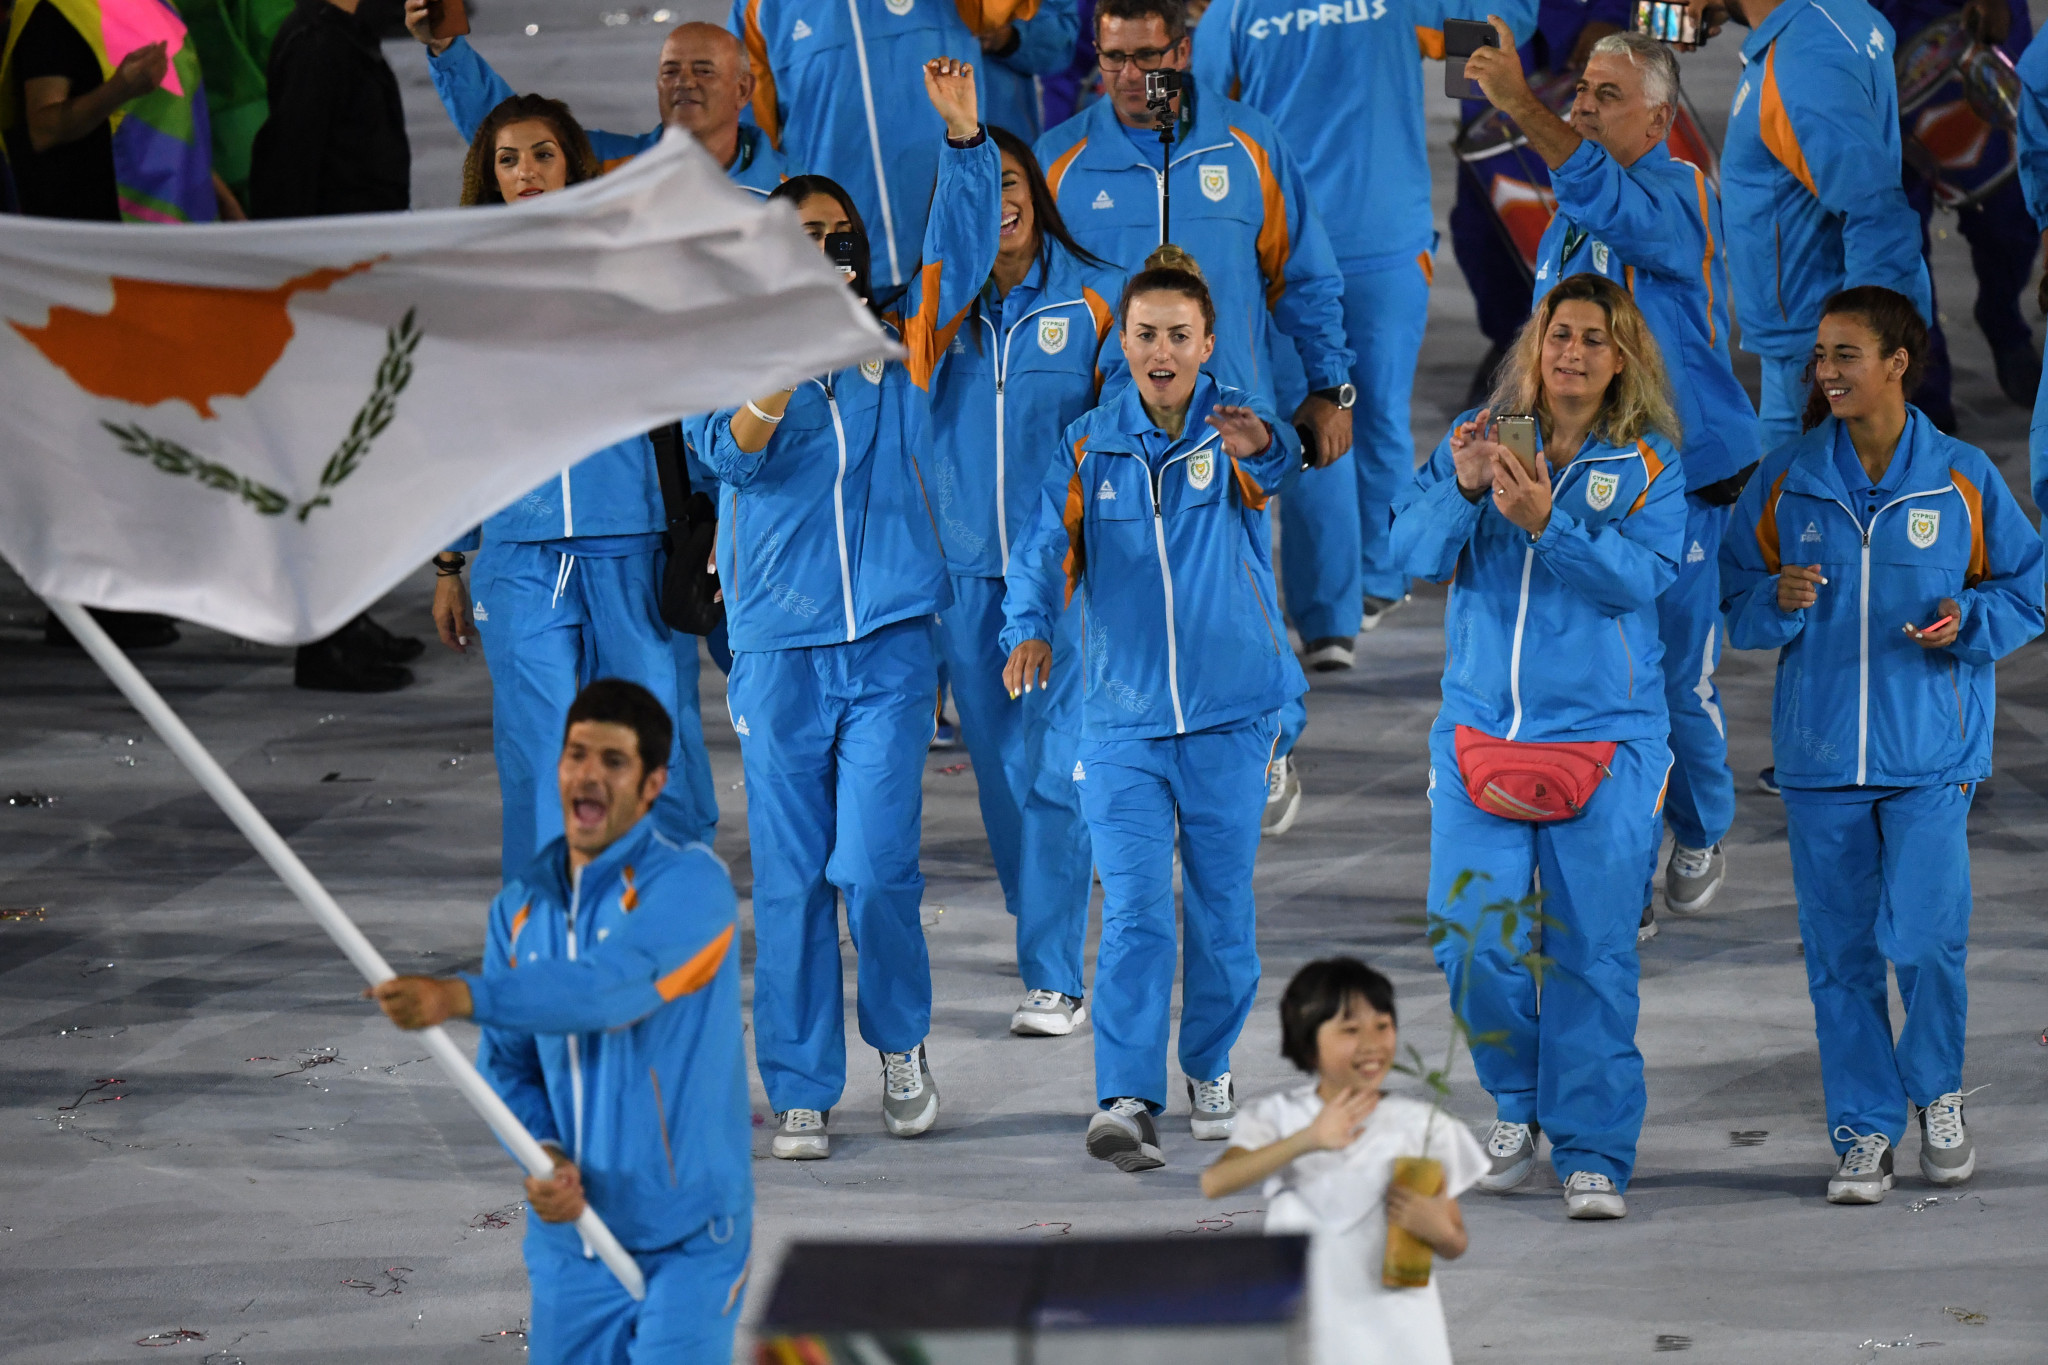 The sponsorship programme aims to help Cypriot athletes qualify for the Olympic Games ©Getty Images